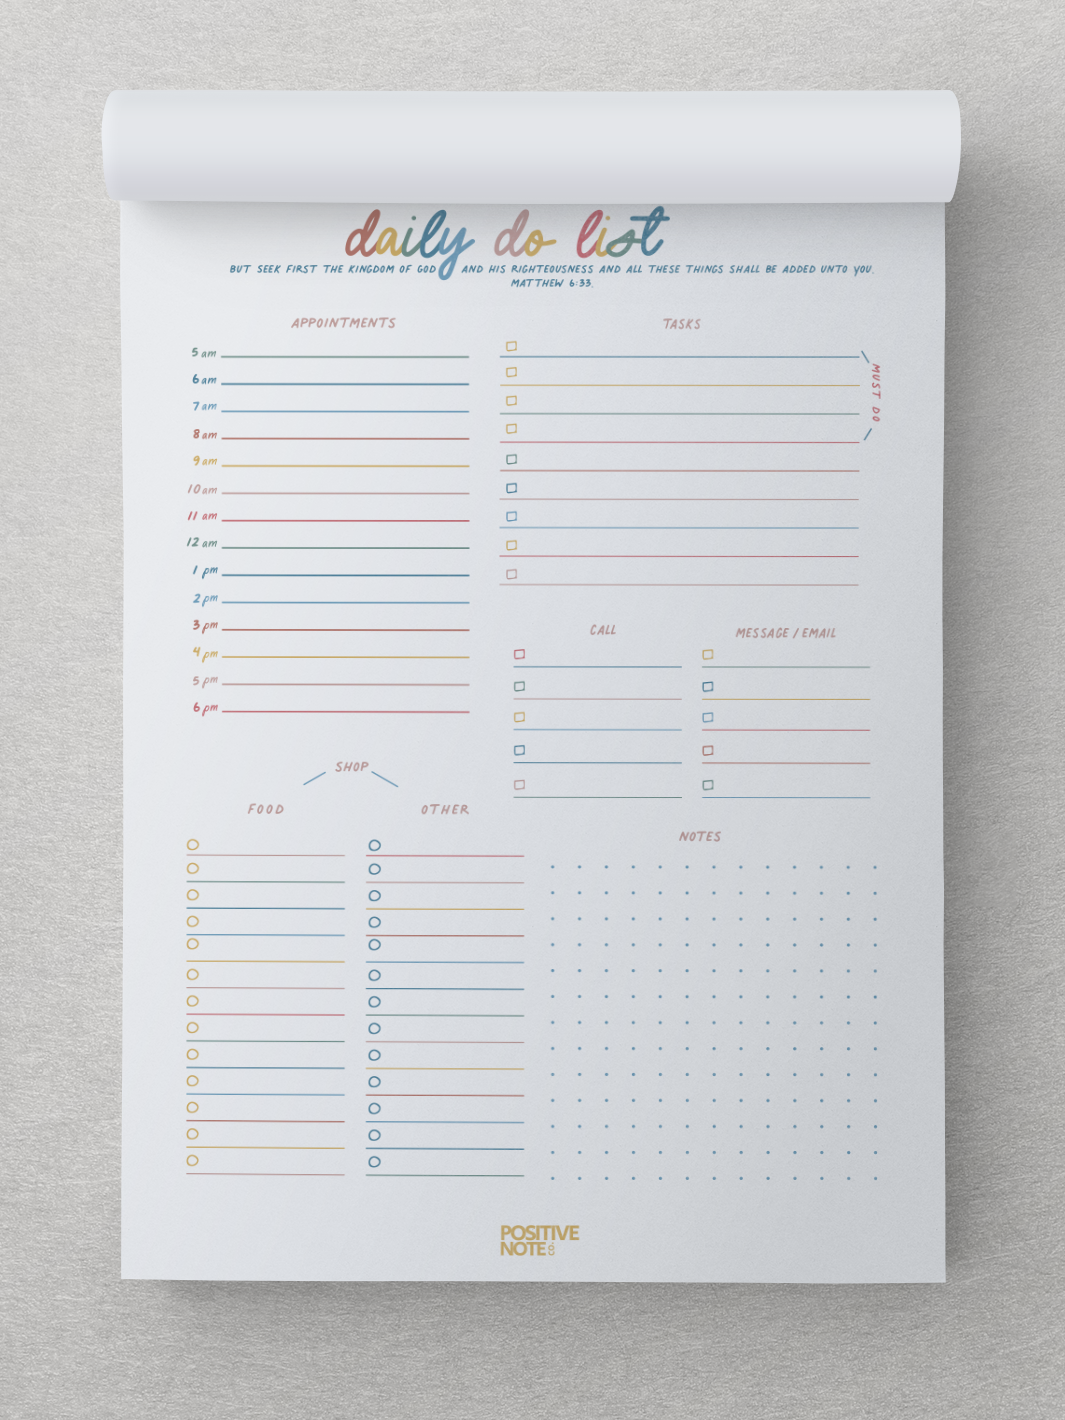 A notepad reads Daily Do List in cursive boho rainbow font at the top. A bible verse is under the title.  The christian daily planner notepad has a place for appointments, tasks, notes, calls, messages and emails and shopping lists.